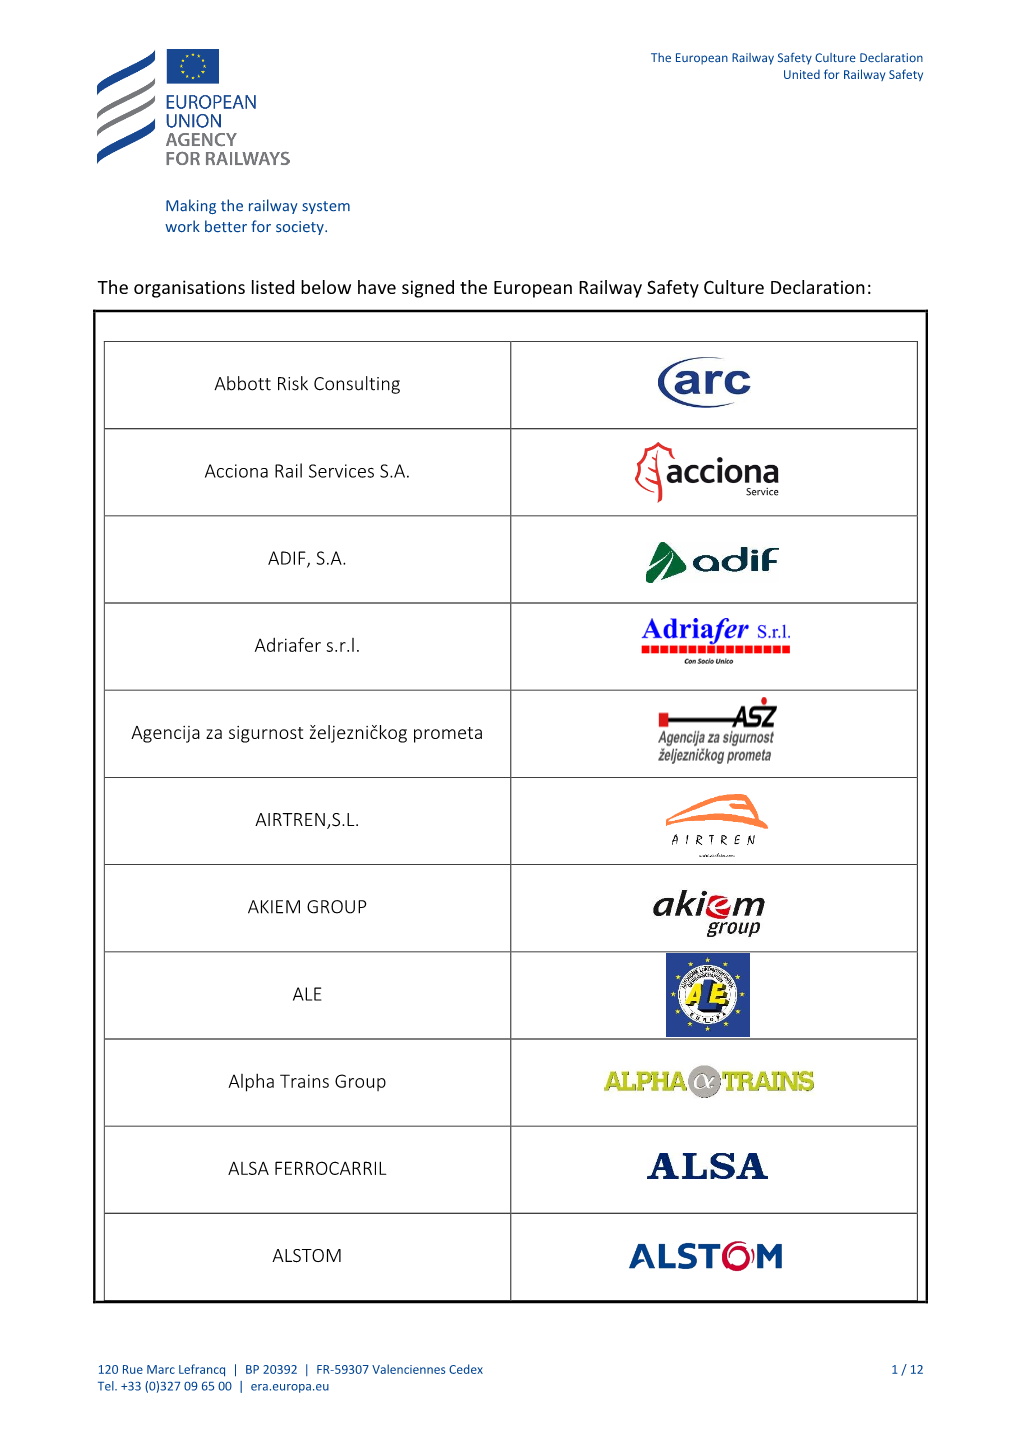 The Organisations Listed Below Have Signed the European Railway Safety Culture Declaration